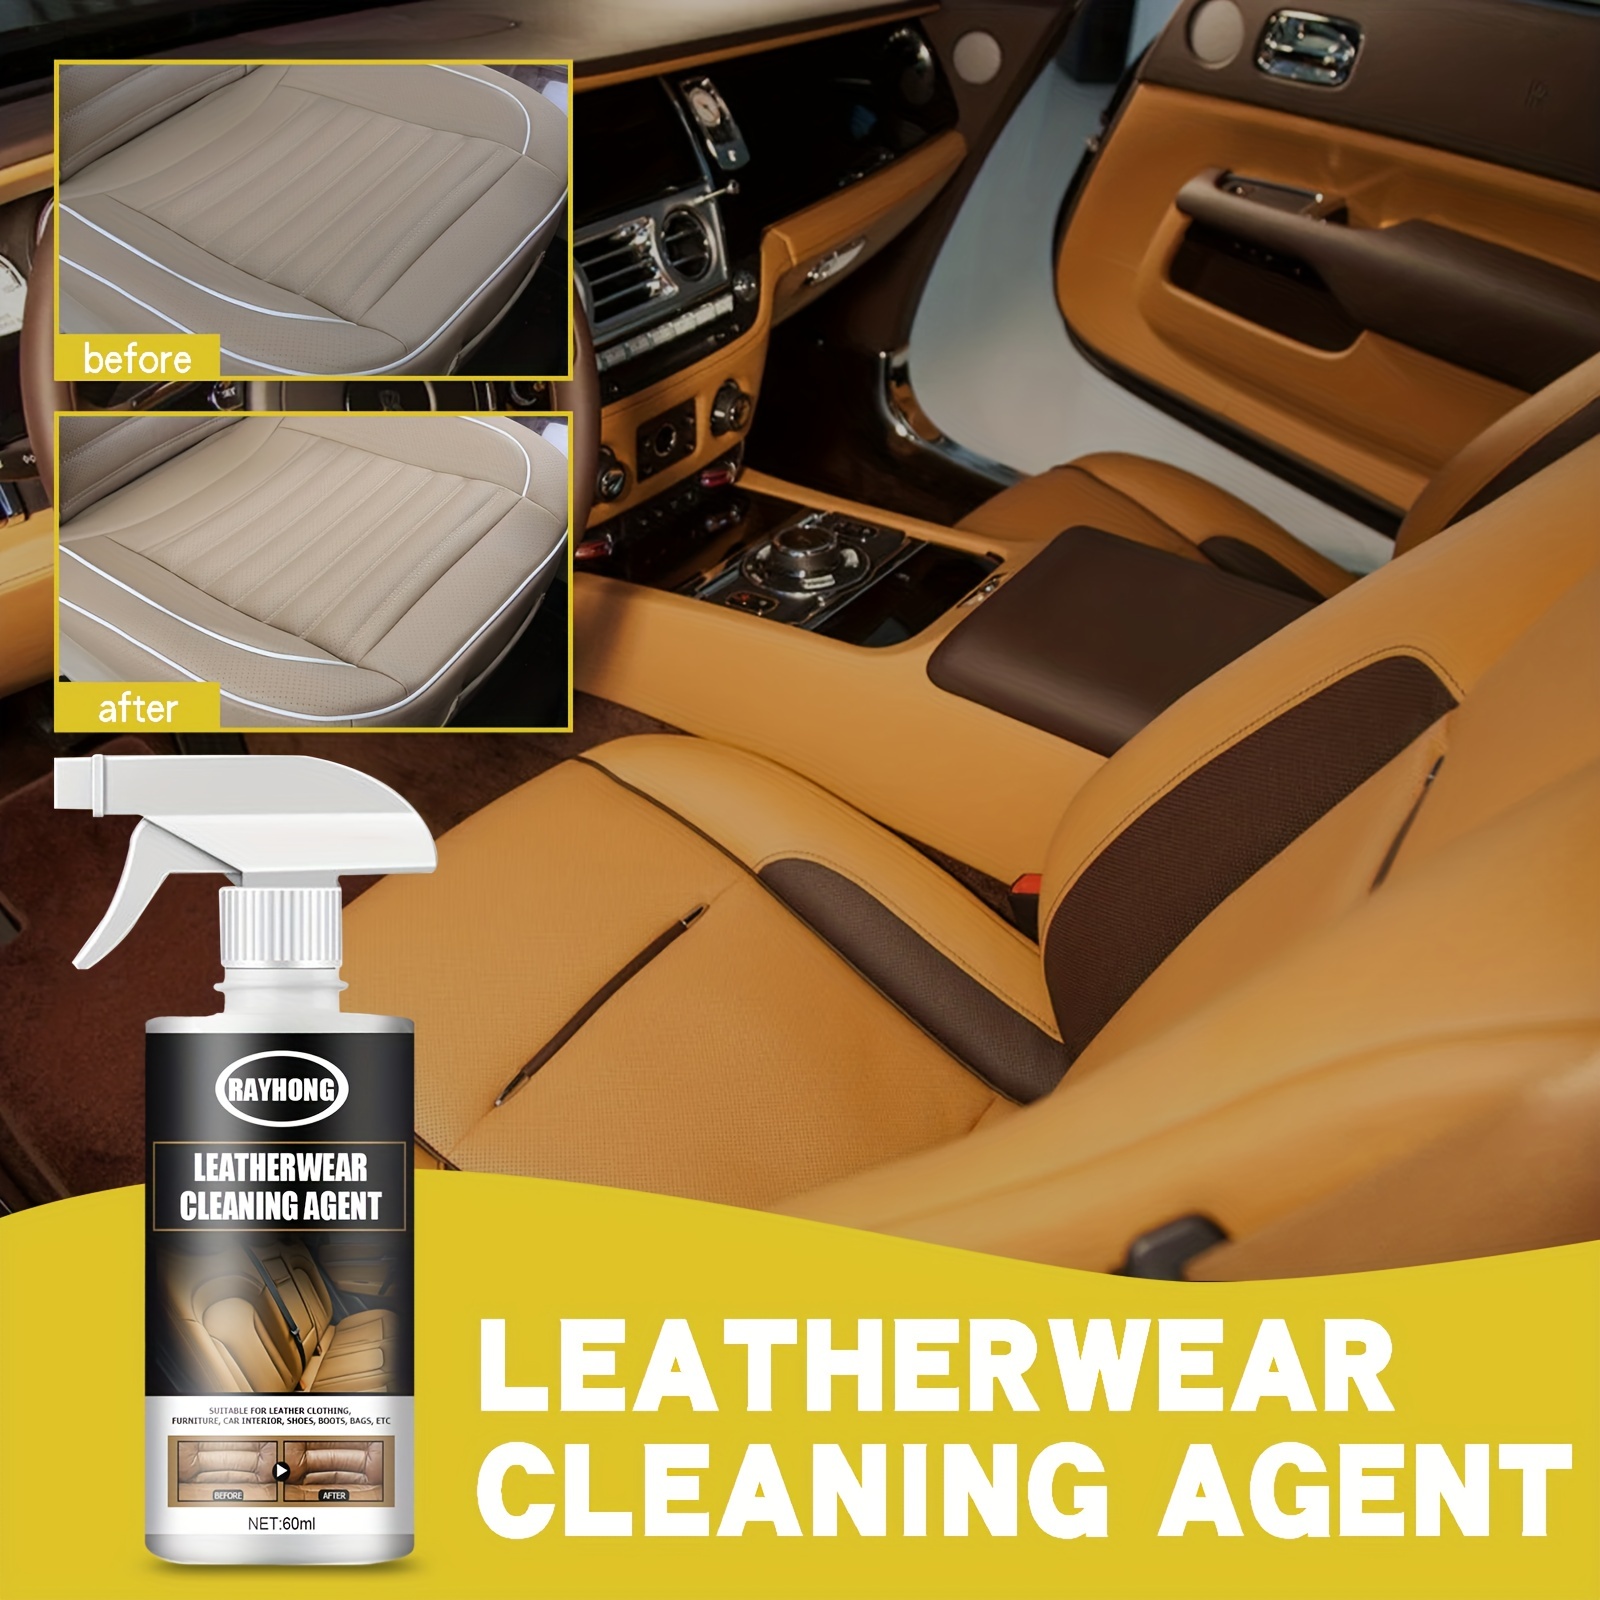 100ml Car Leather Cleaner For Interior Cleaning And Stain Removal, Suitable  For Steering Wheel, Storage Box, Seats, Mildew, Etc.